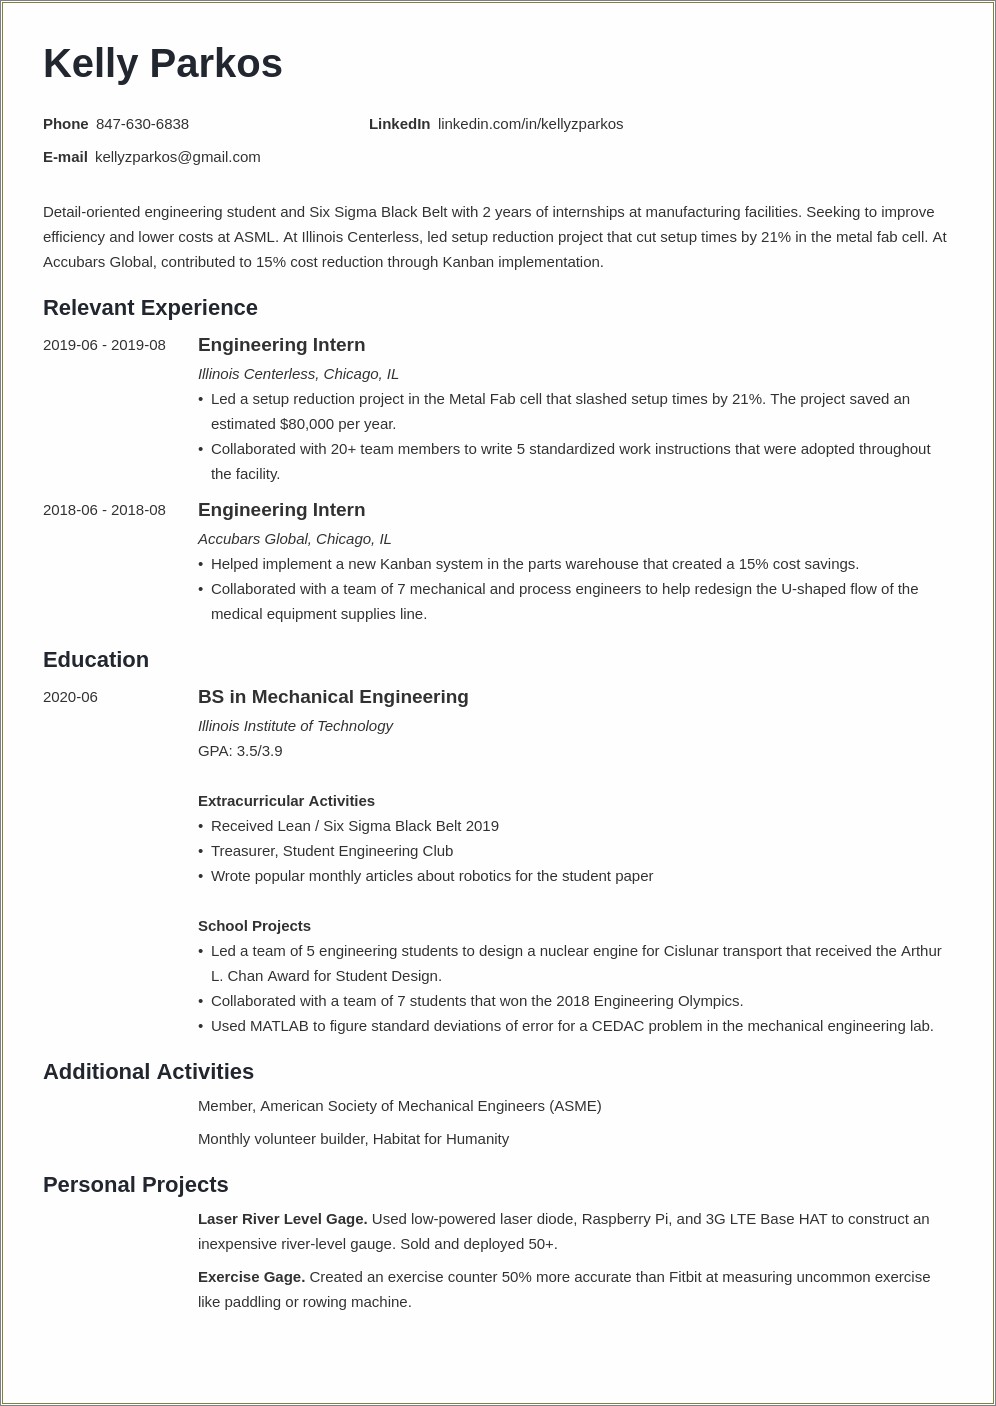 Resume Wording For Creating Wokr Flow Process